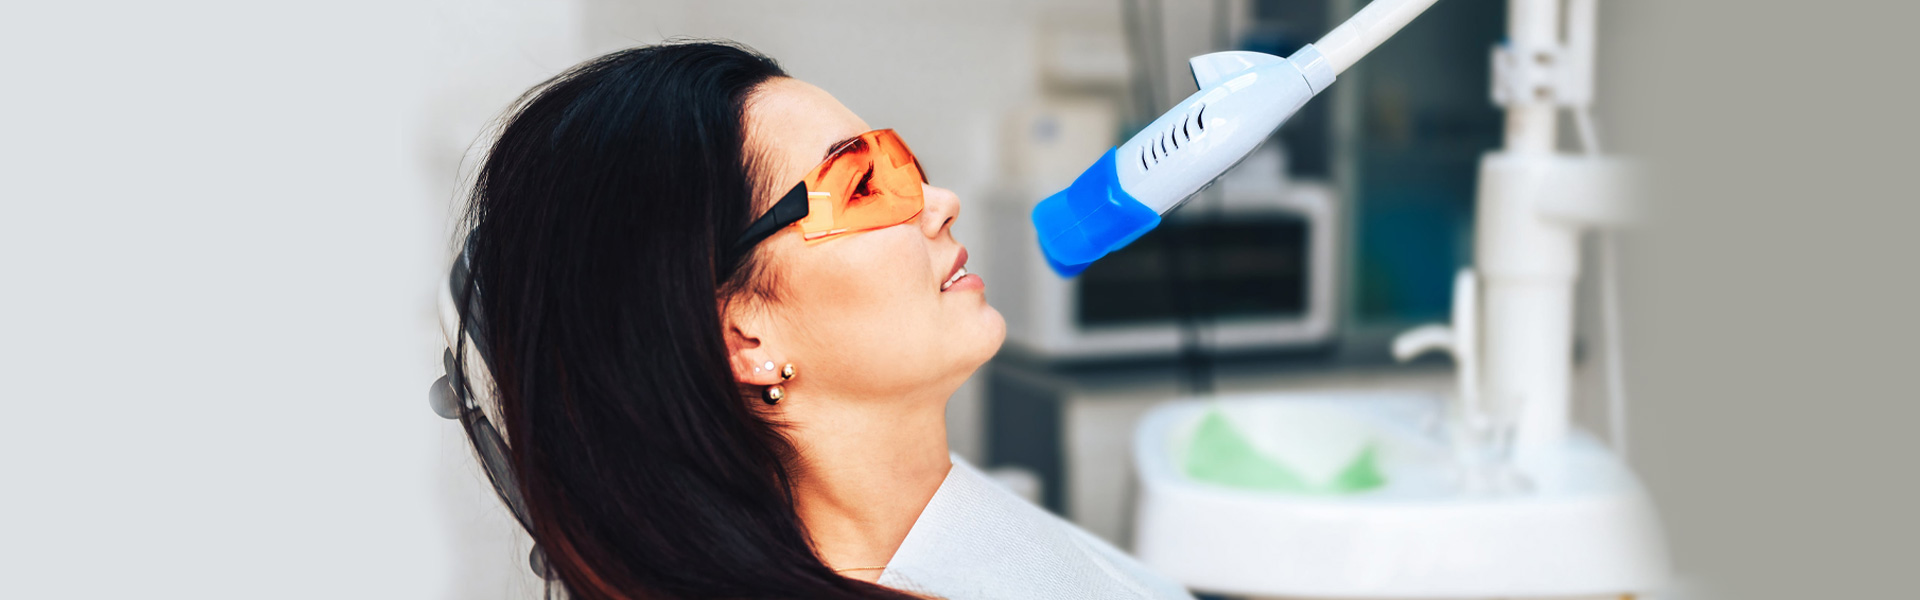 All You Need to Know About Laser Dentistry